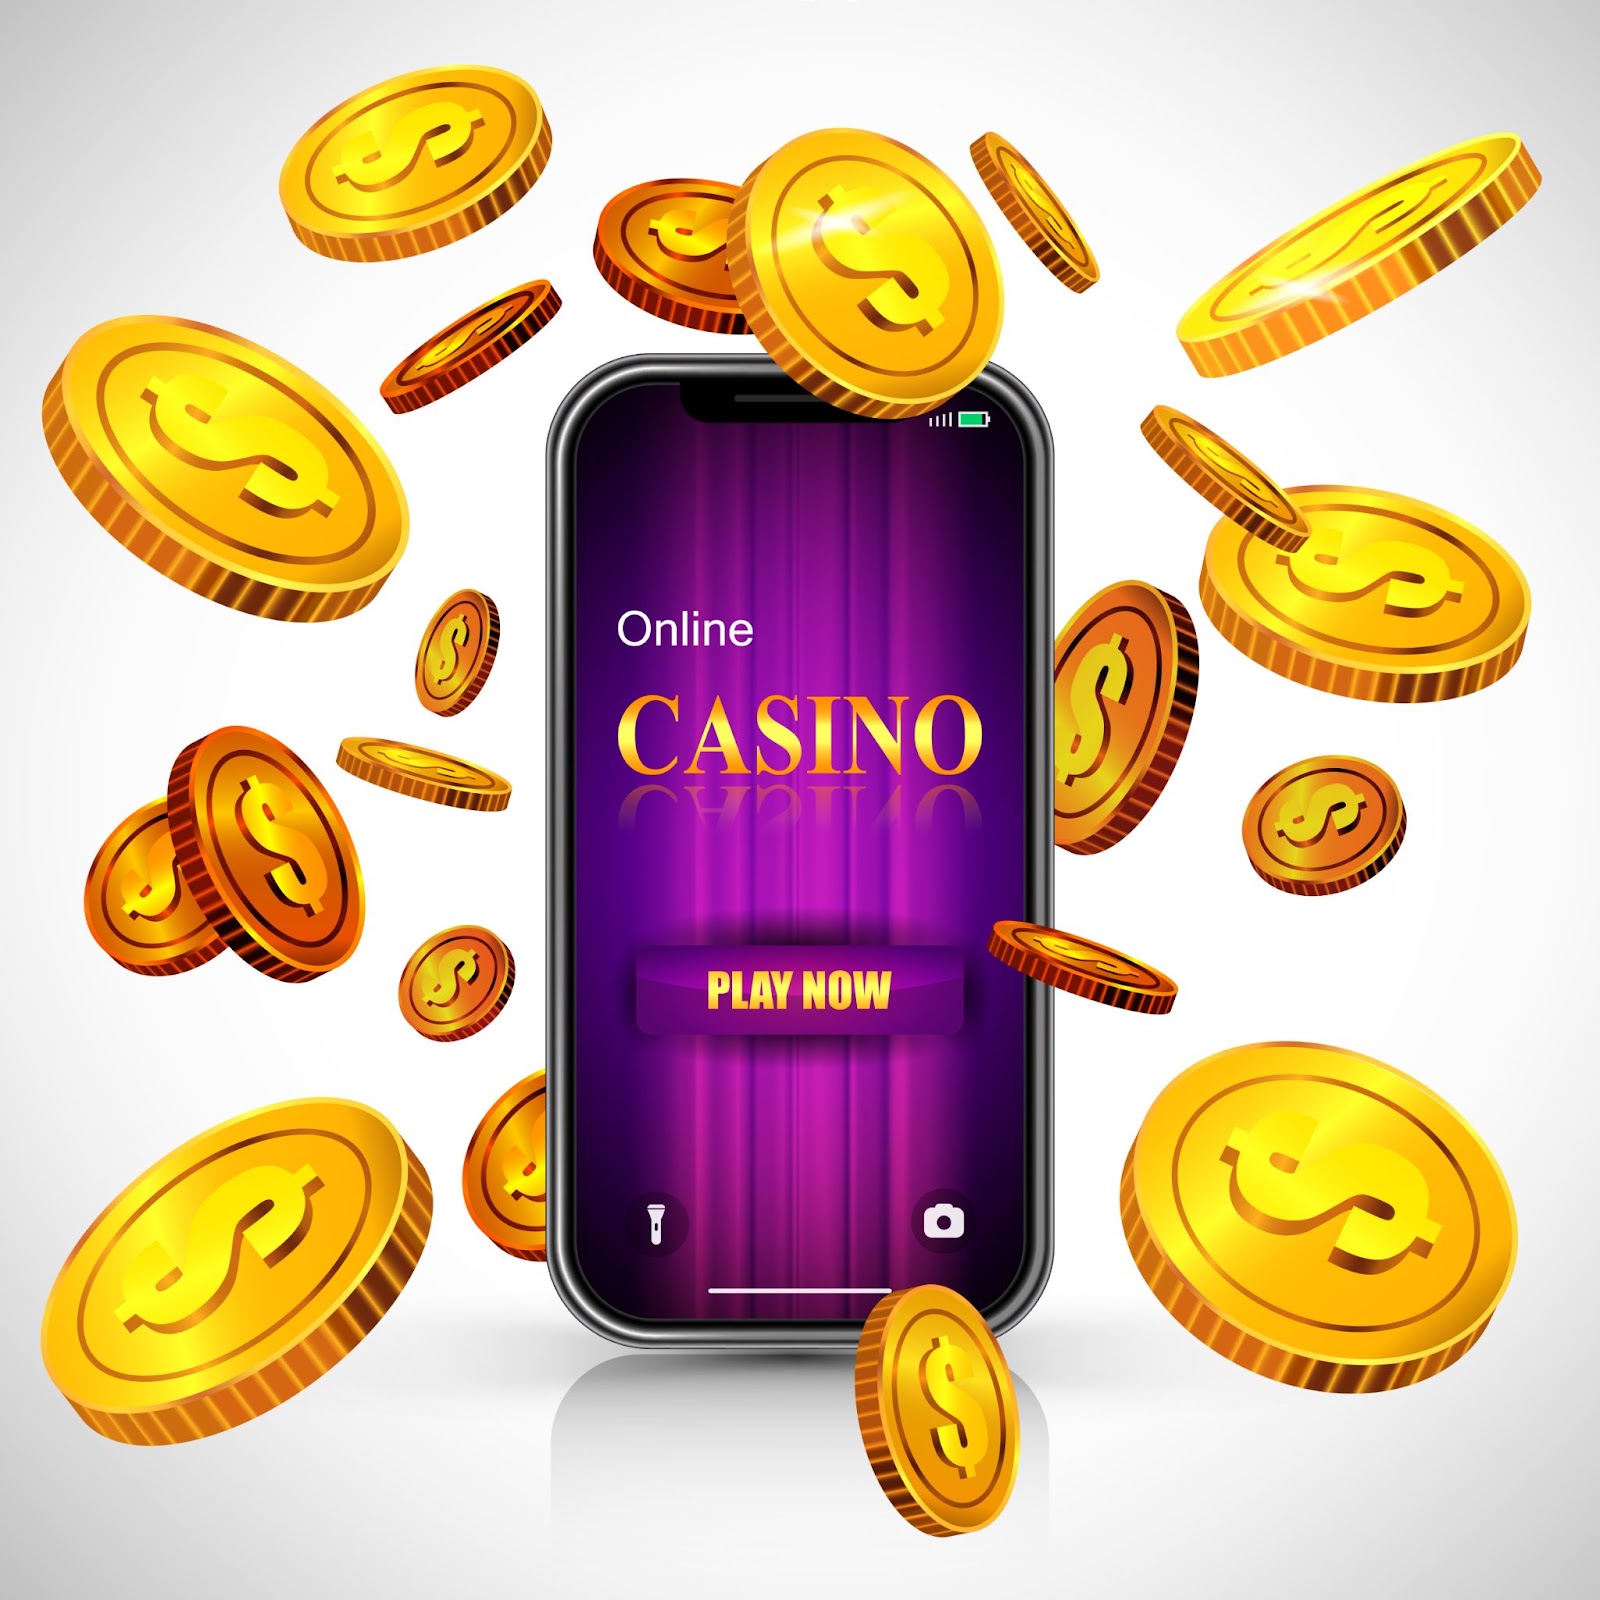 Online casino on mobile phone on white background and coins with dollar sign.